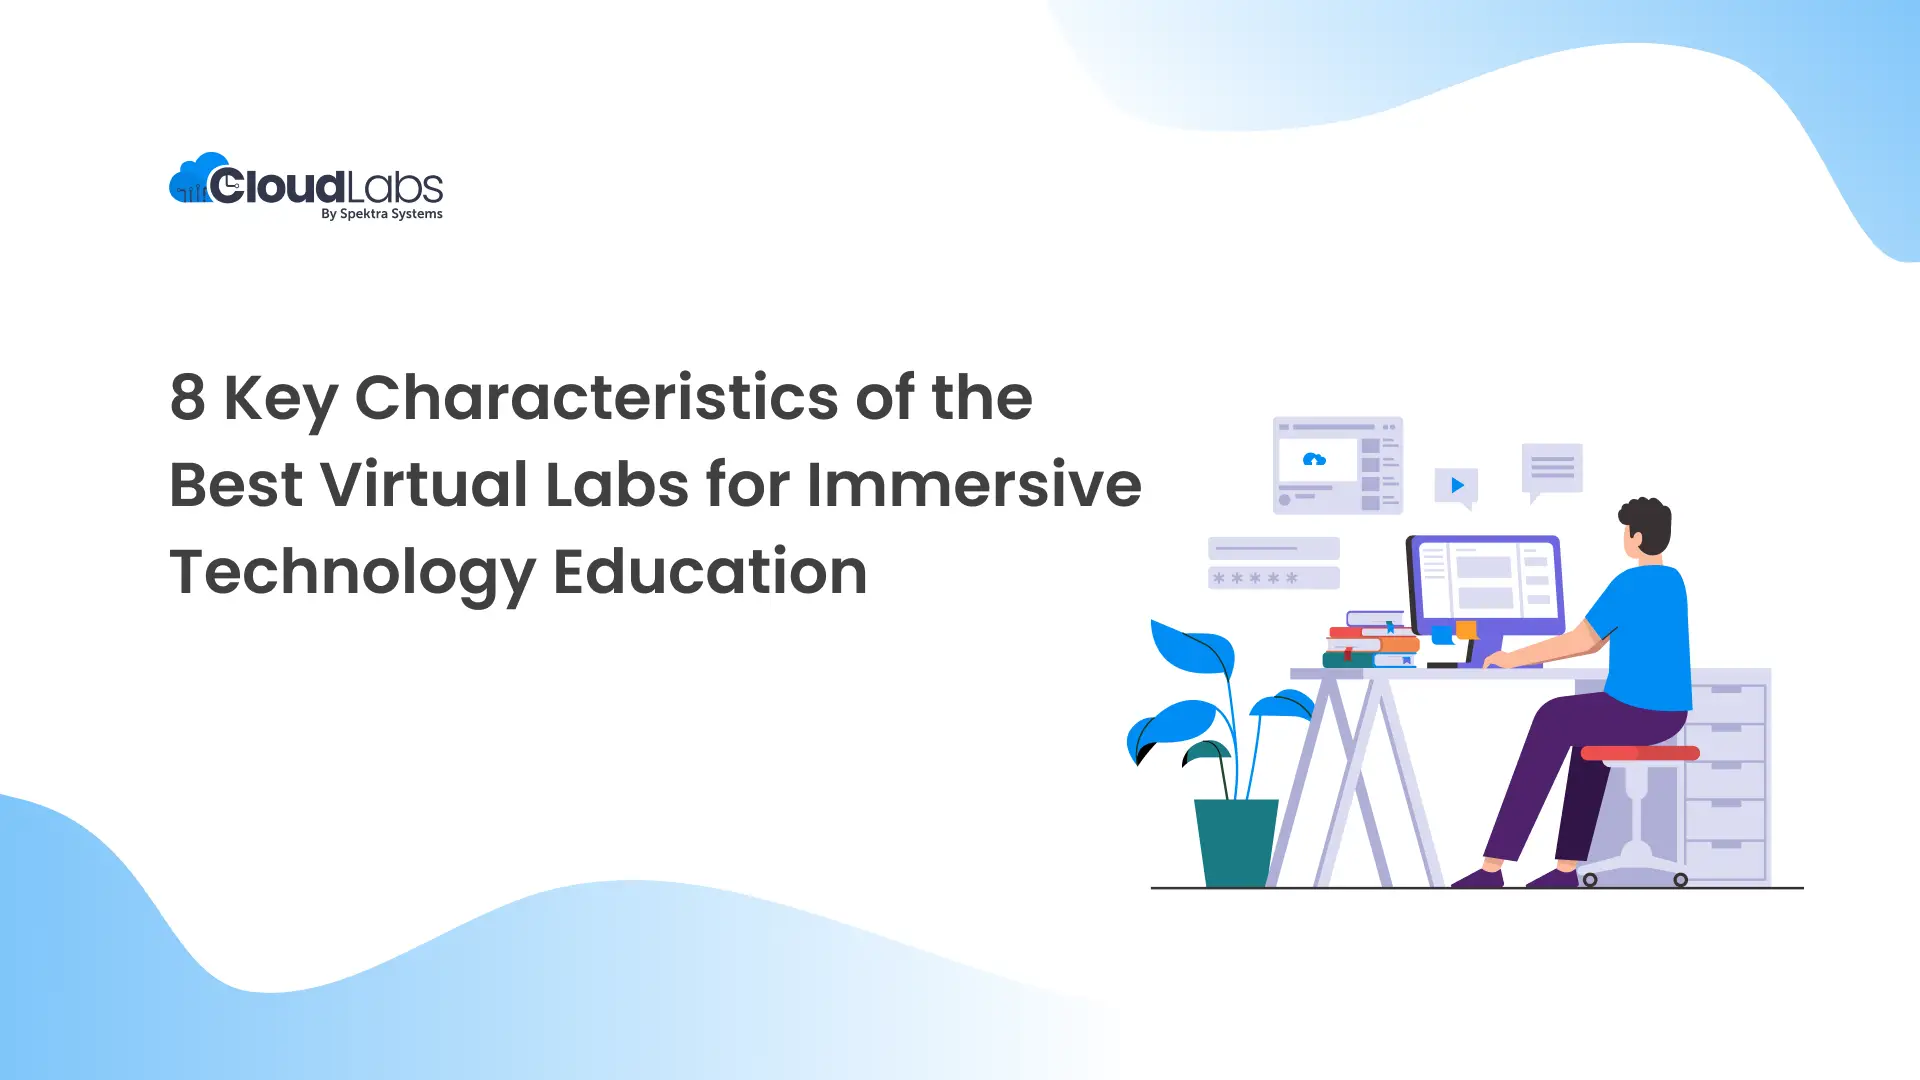 8 Key Characteristics of the Best Virtual Labs for Immersive Technology Education